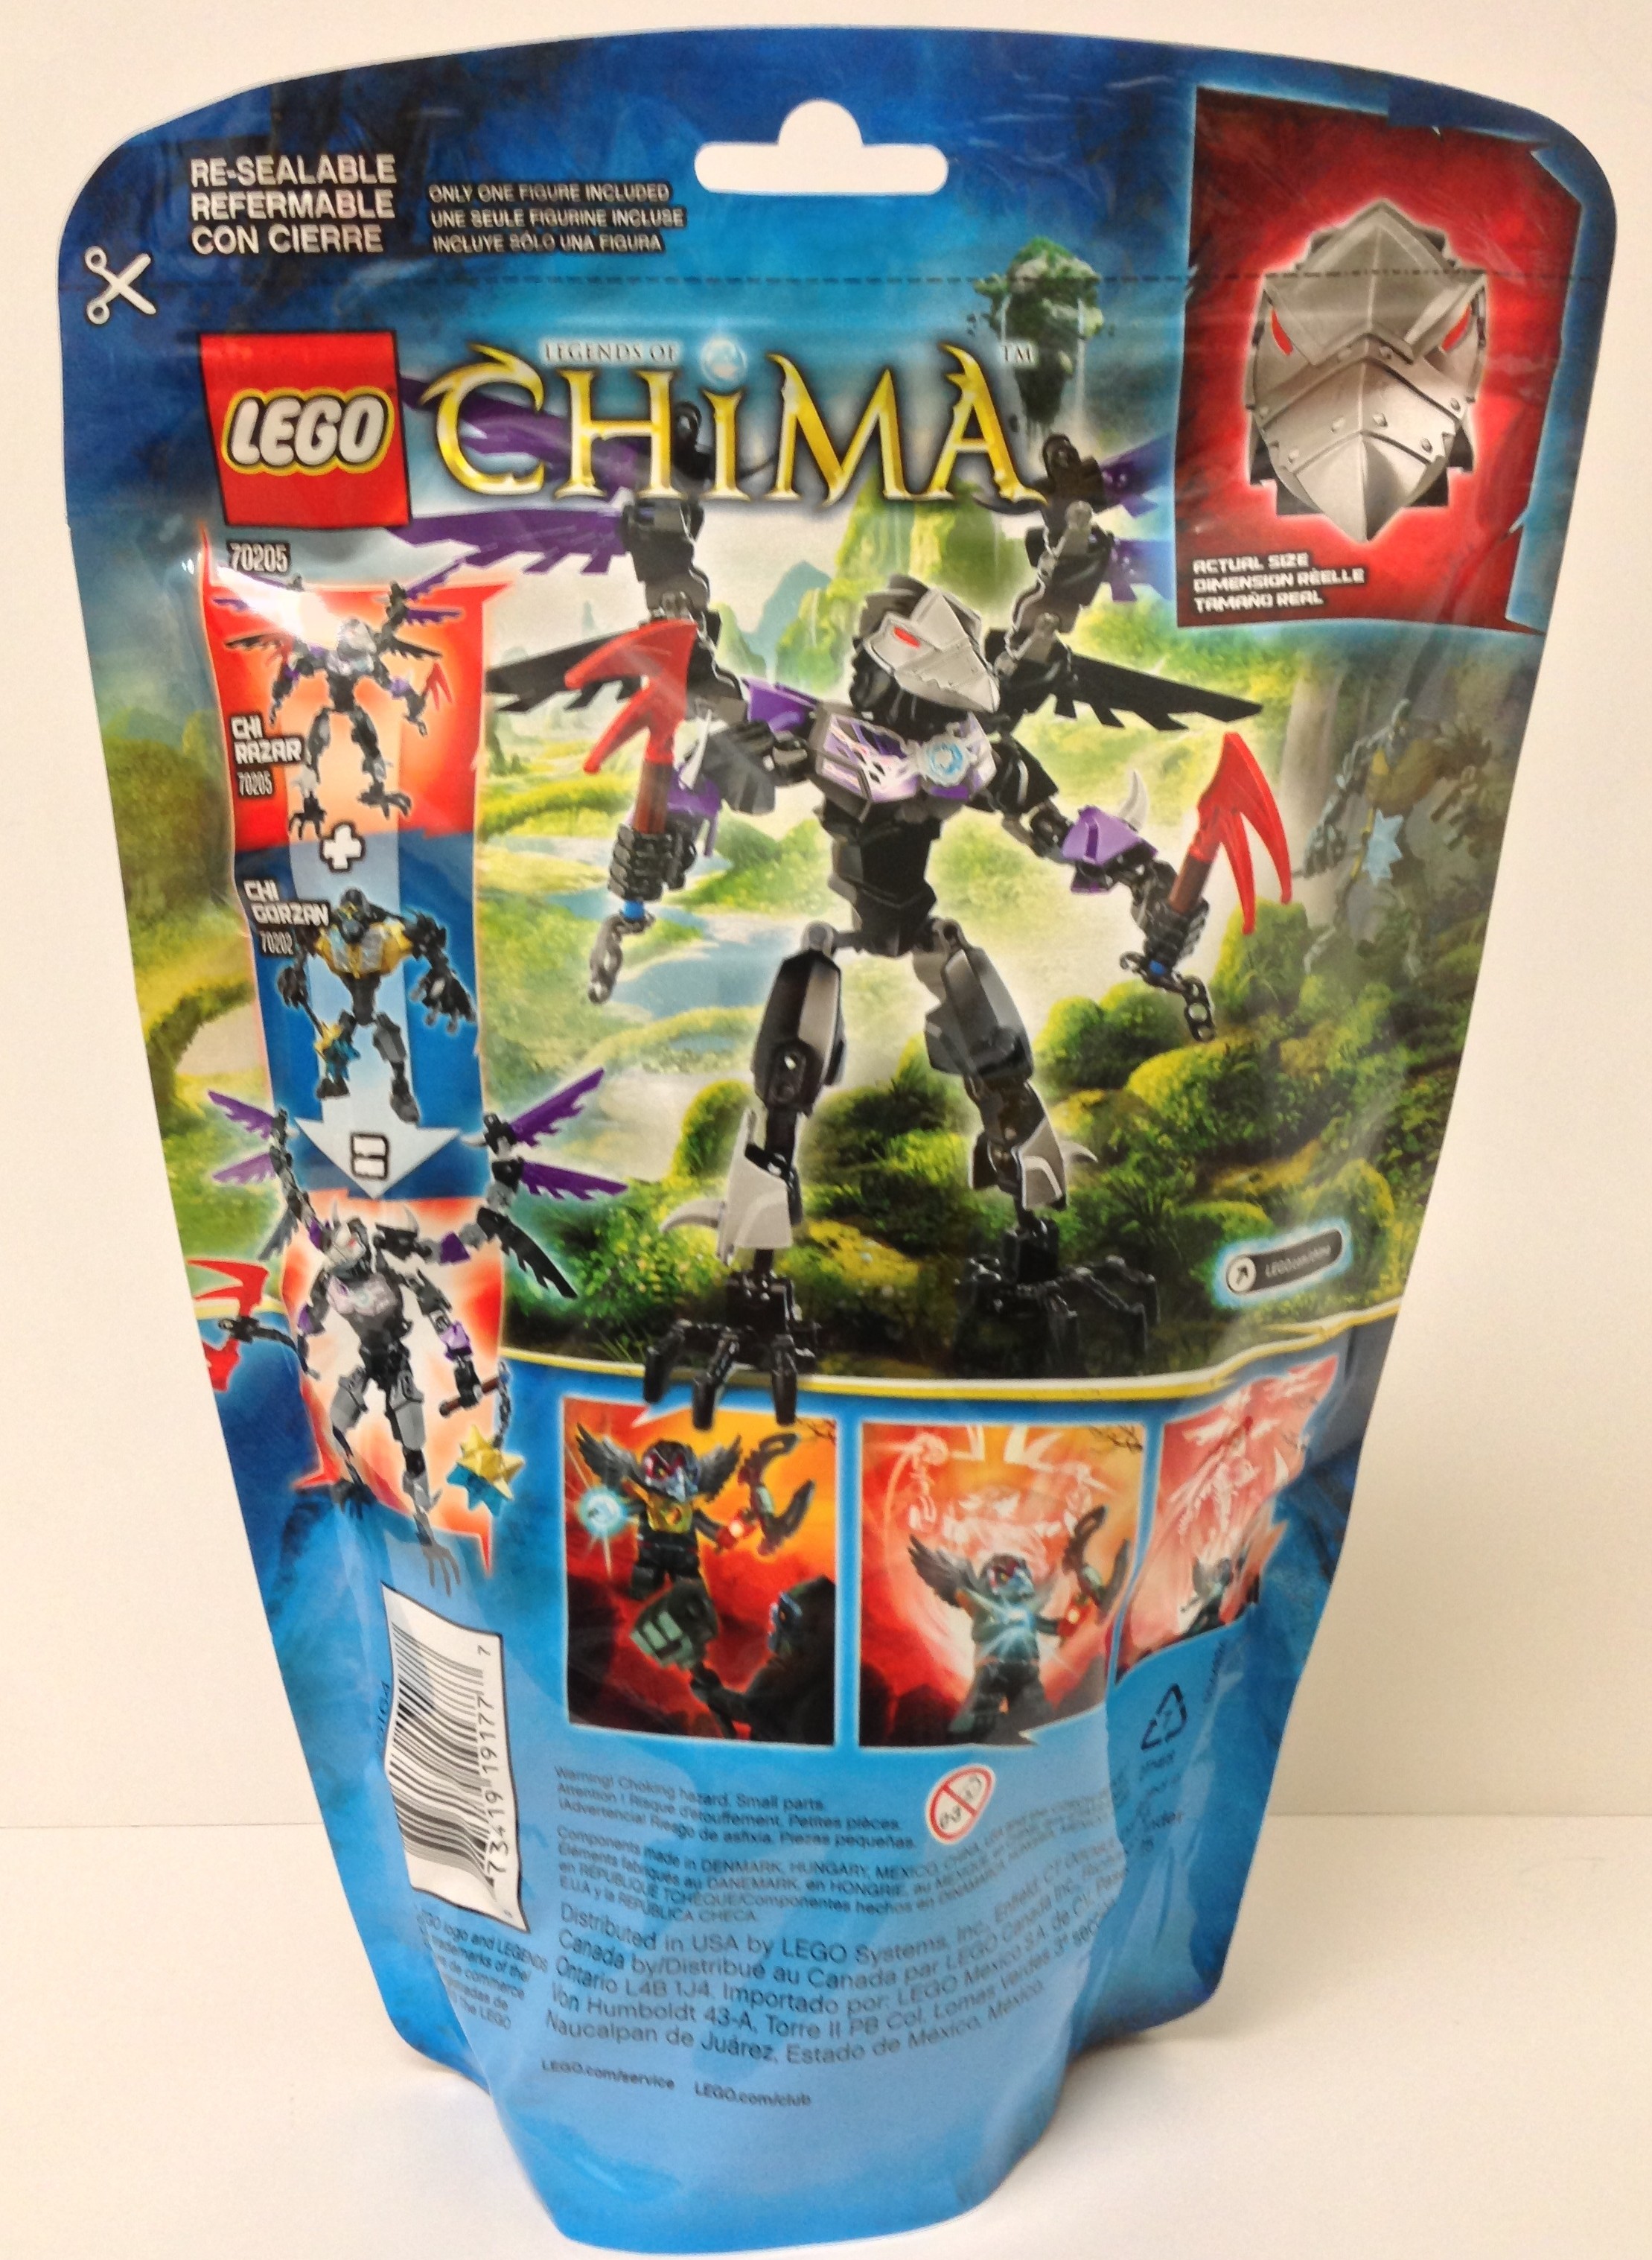 Gasping Preach under LEGO Chima CHI Razar Buildable Figure Set Review & Photos 70205 - Bricks  and Bloks